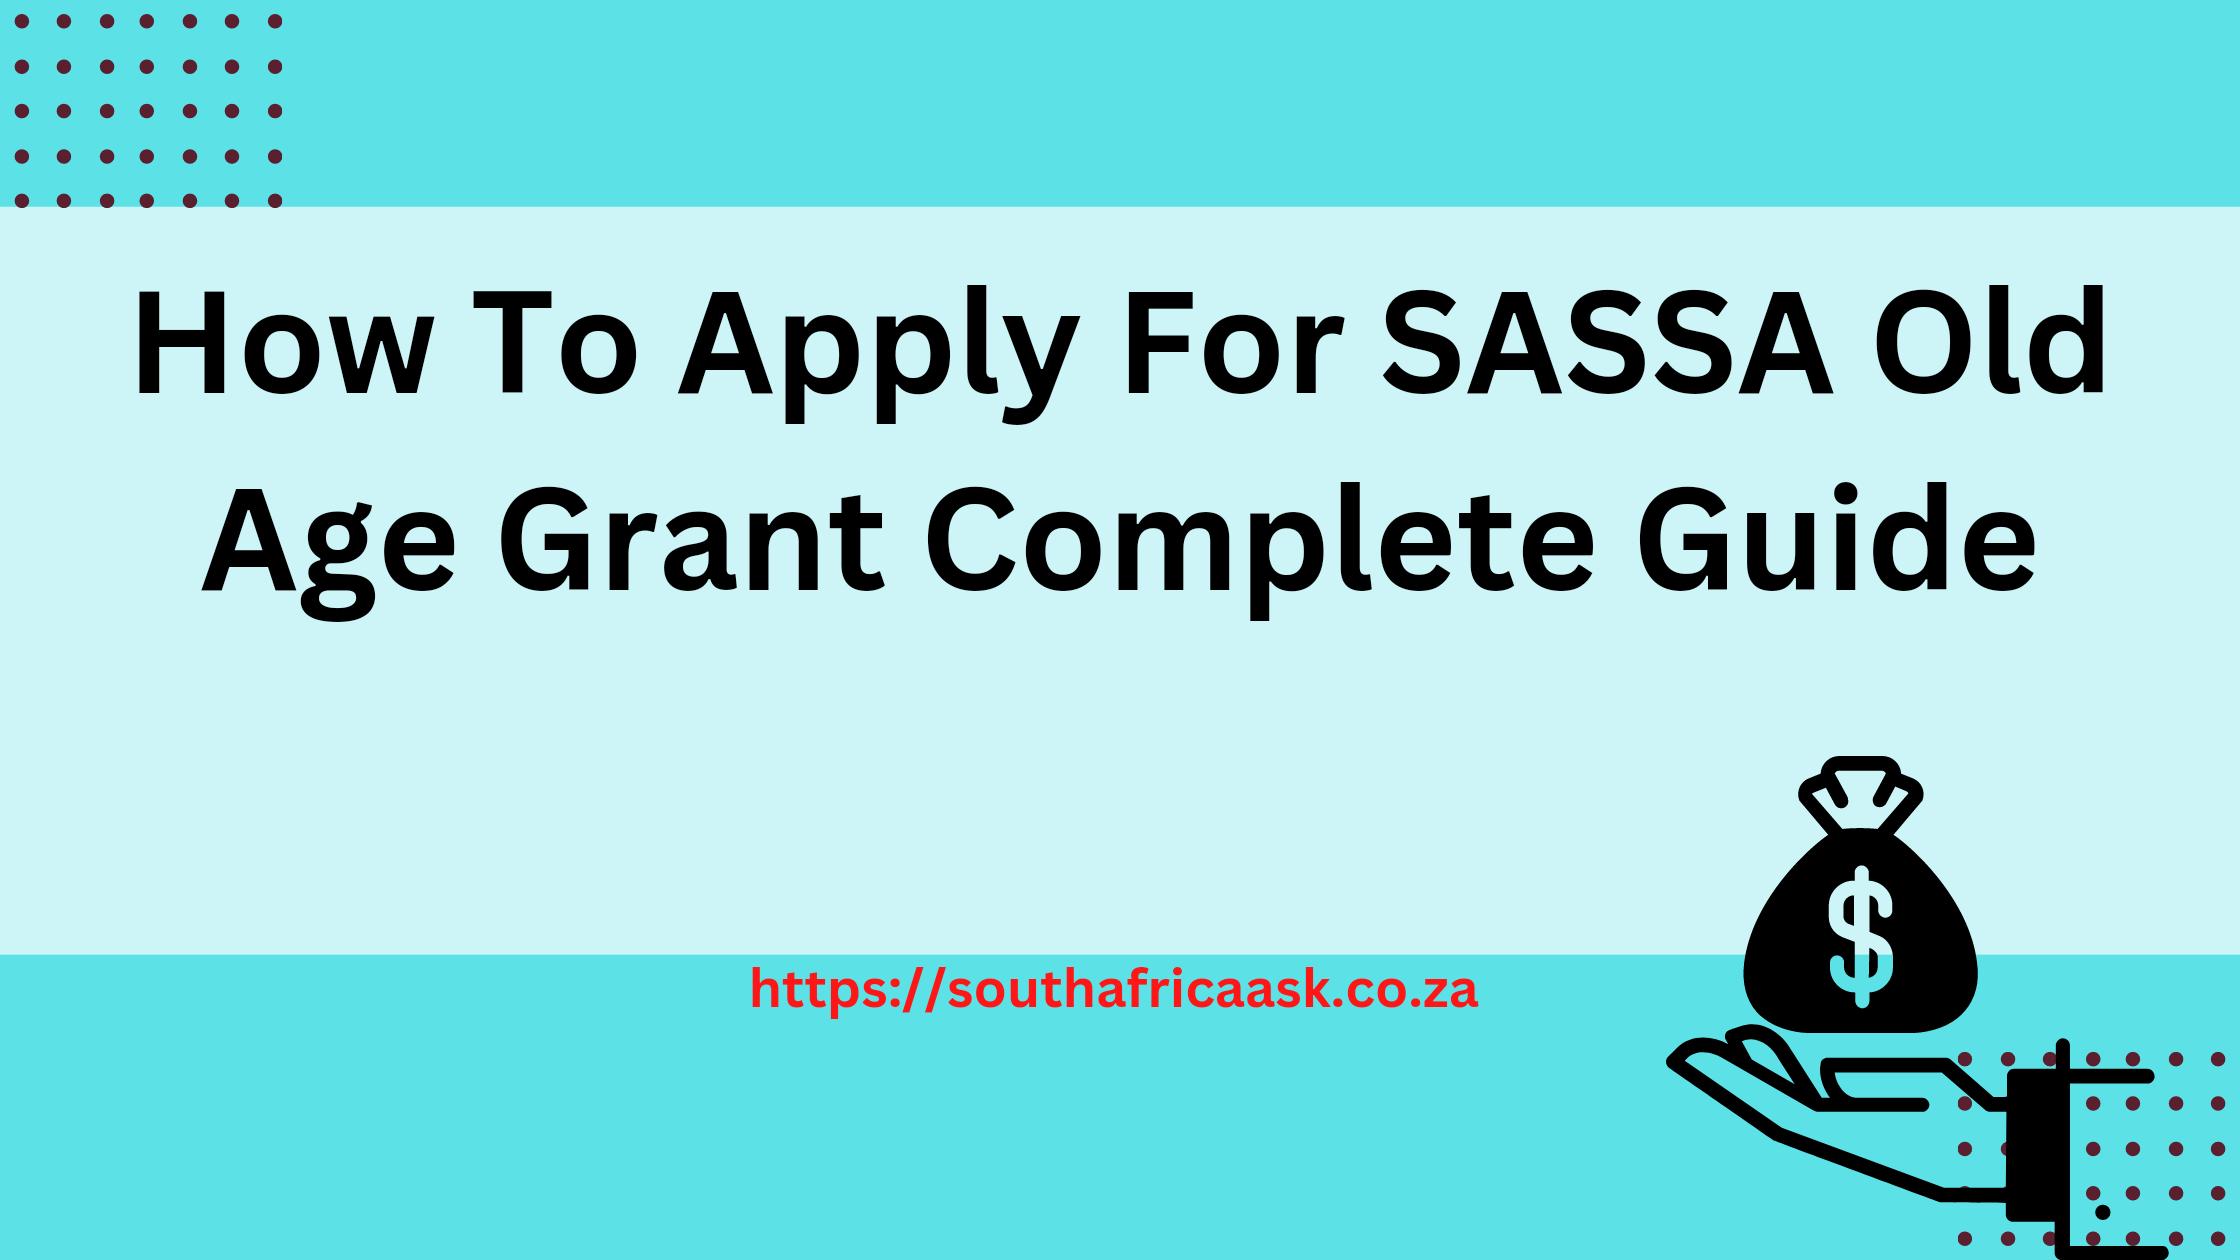 How To Apply For SASSA Old Age Grant Complete Guide